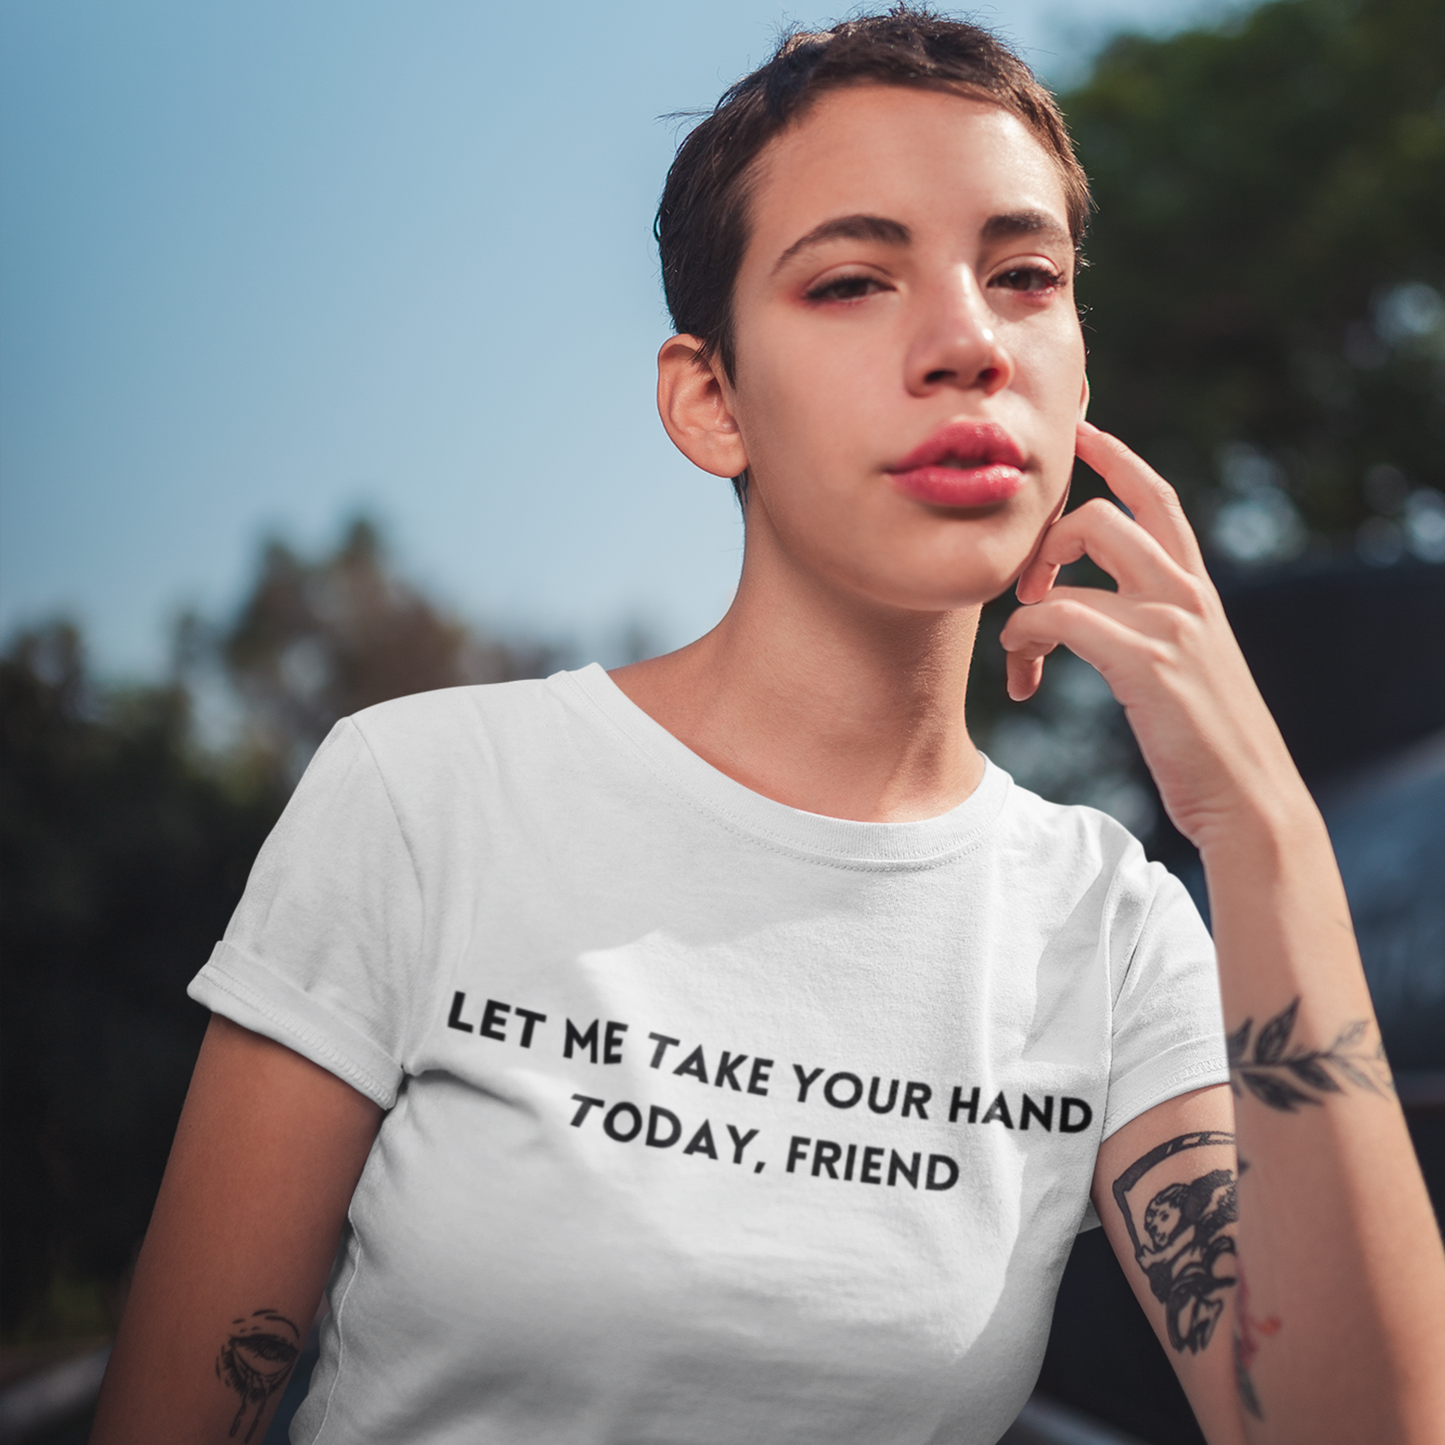 Let me take your hand today friend  Inspirational words t shirt  t shirt gift for caring friends self affirming words t shirt